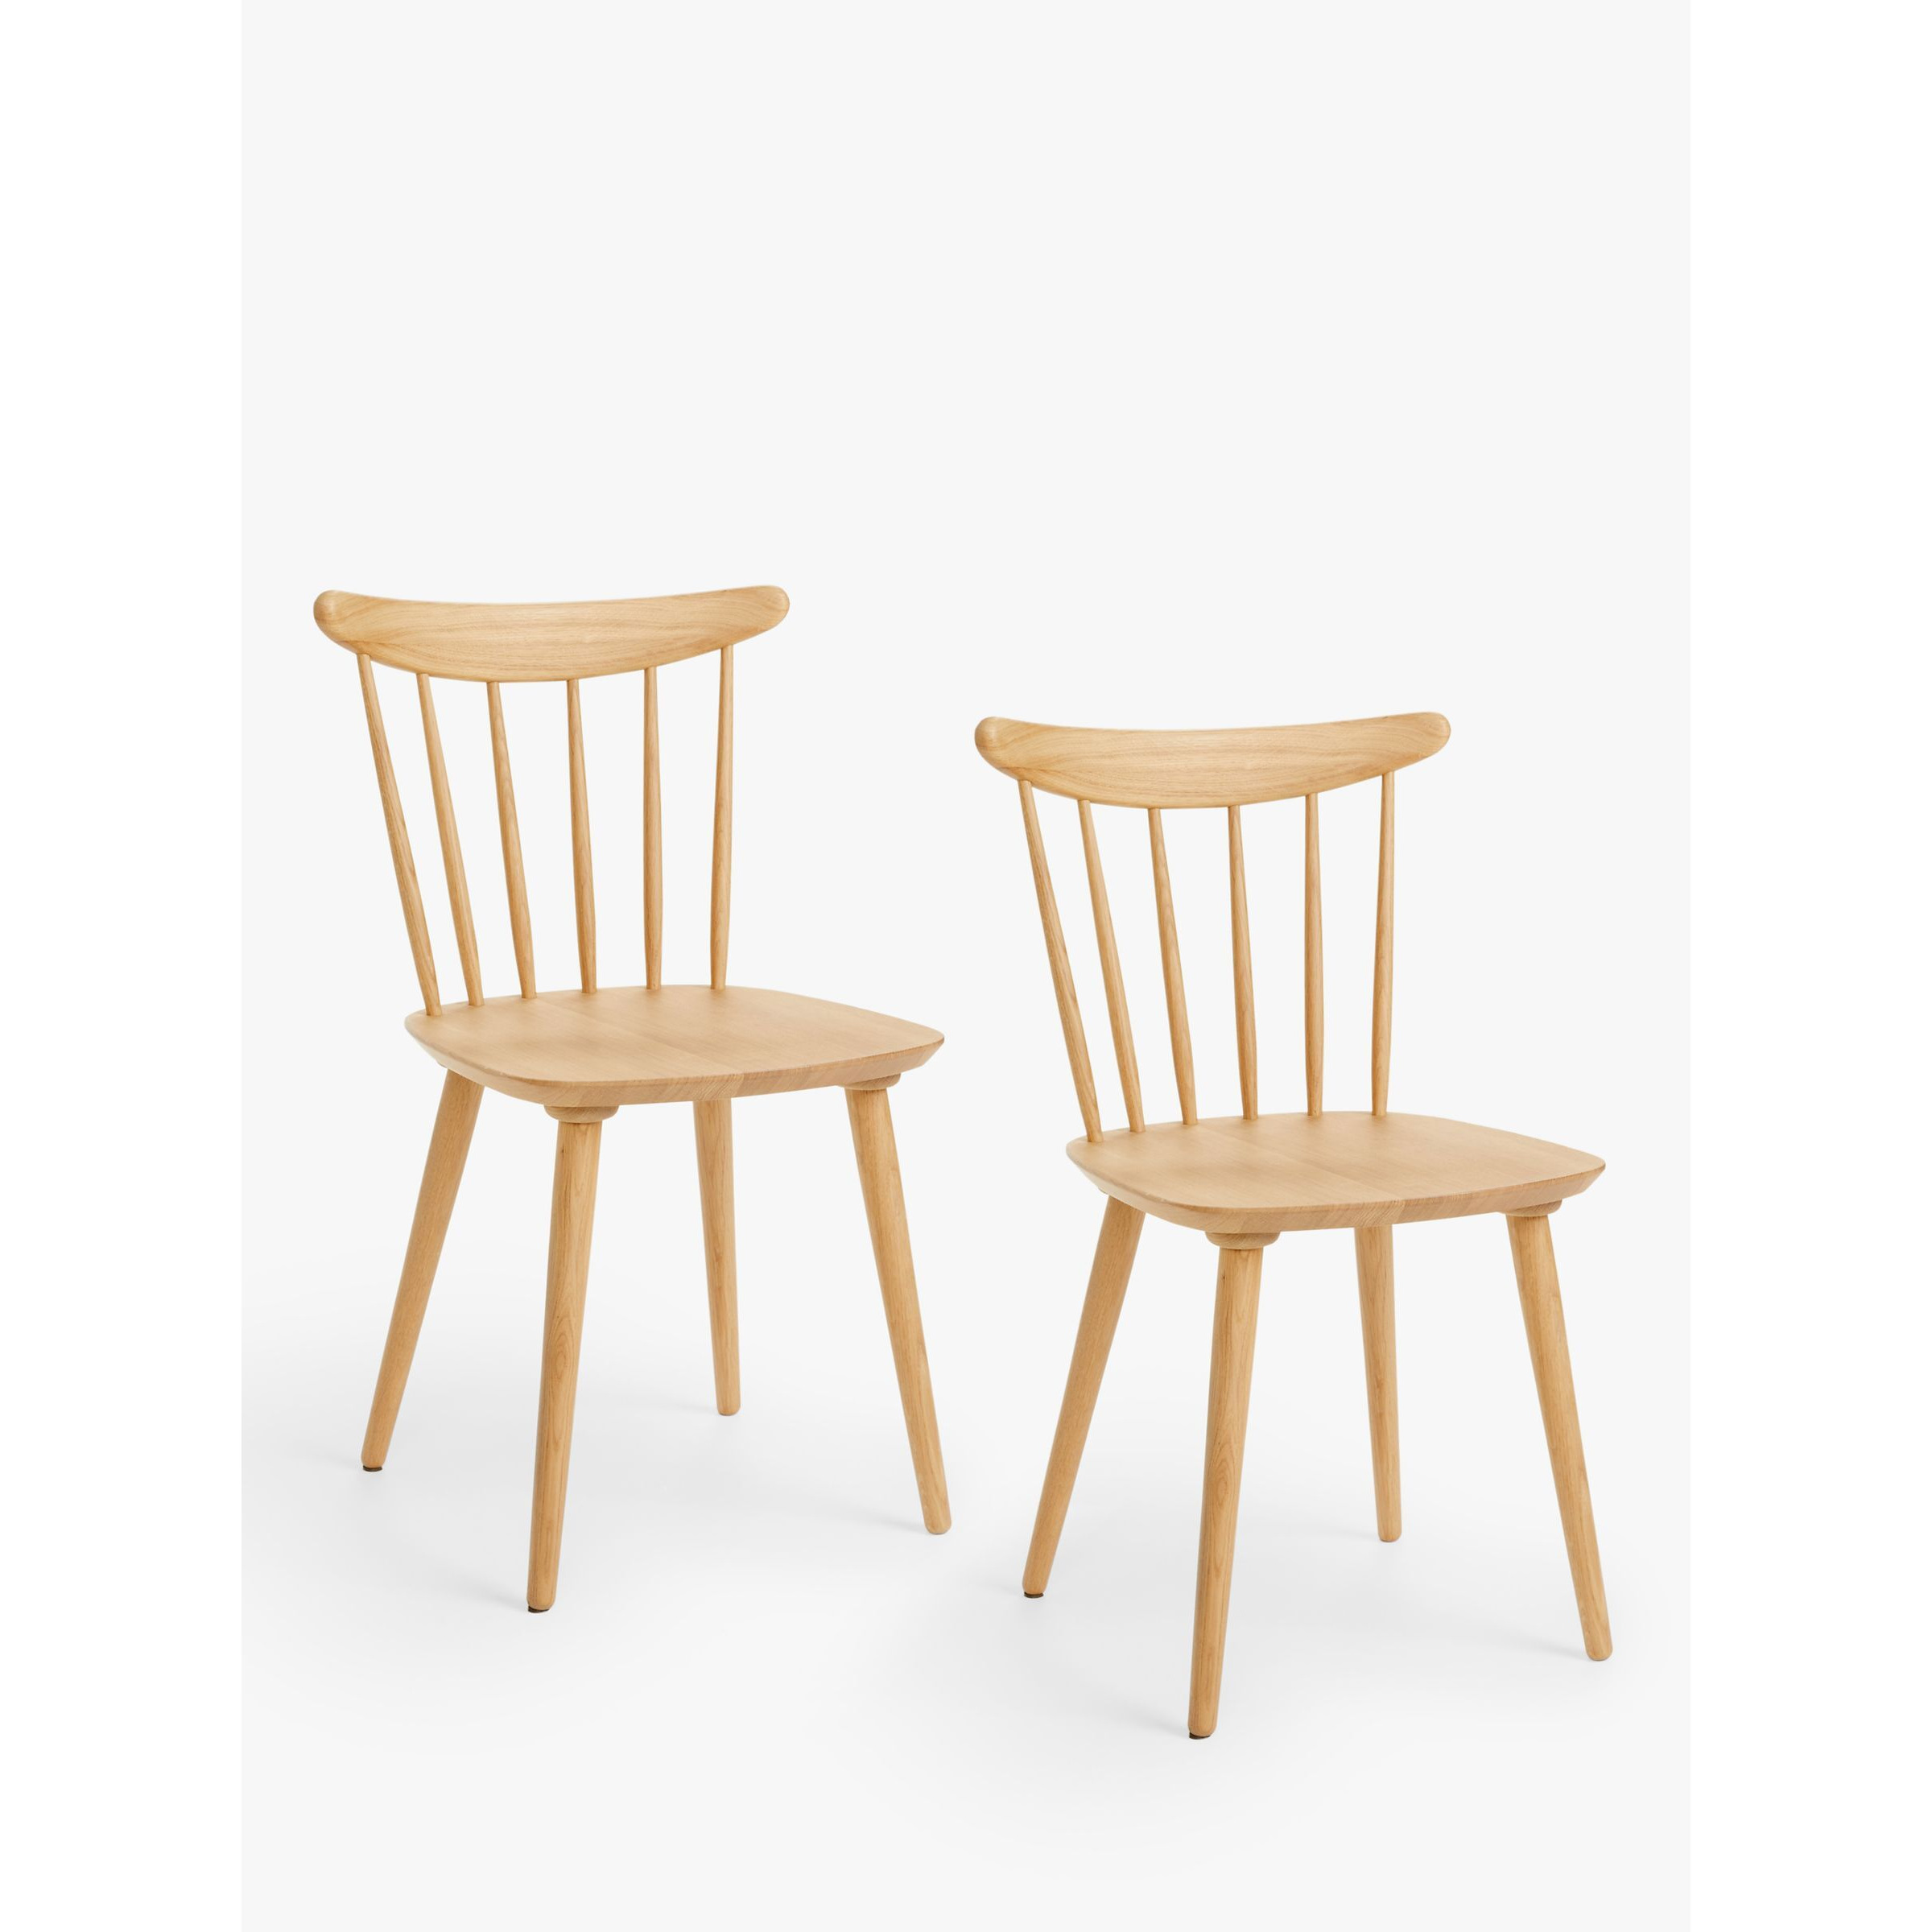 John Lewis Spindle Dining Chair, Set of 2, FSC-Certified (Beech Wood) - image 1